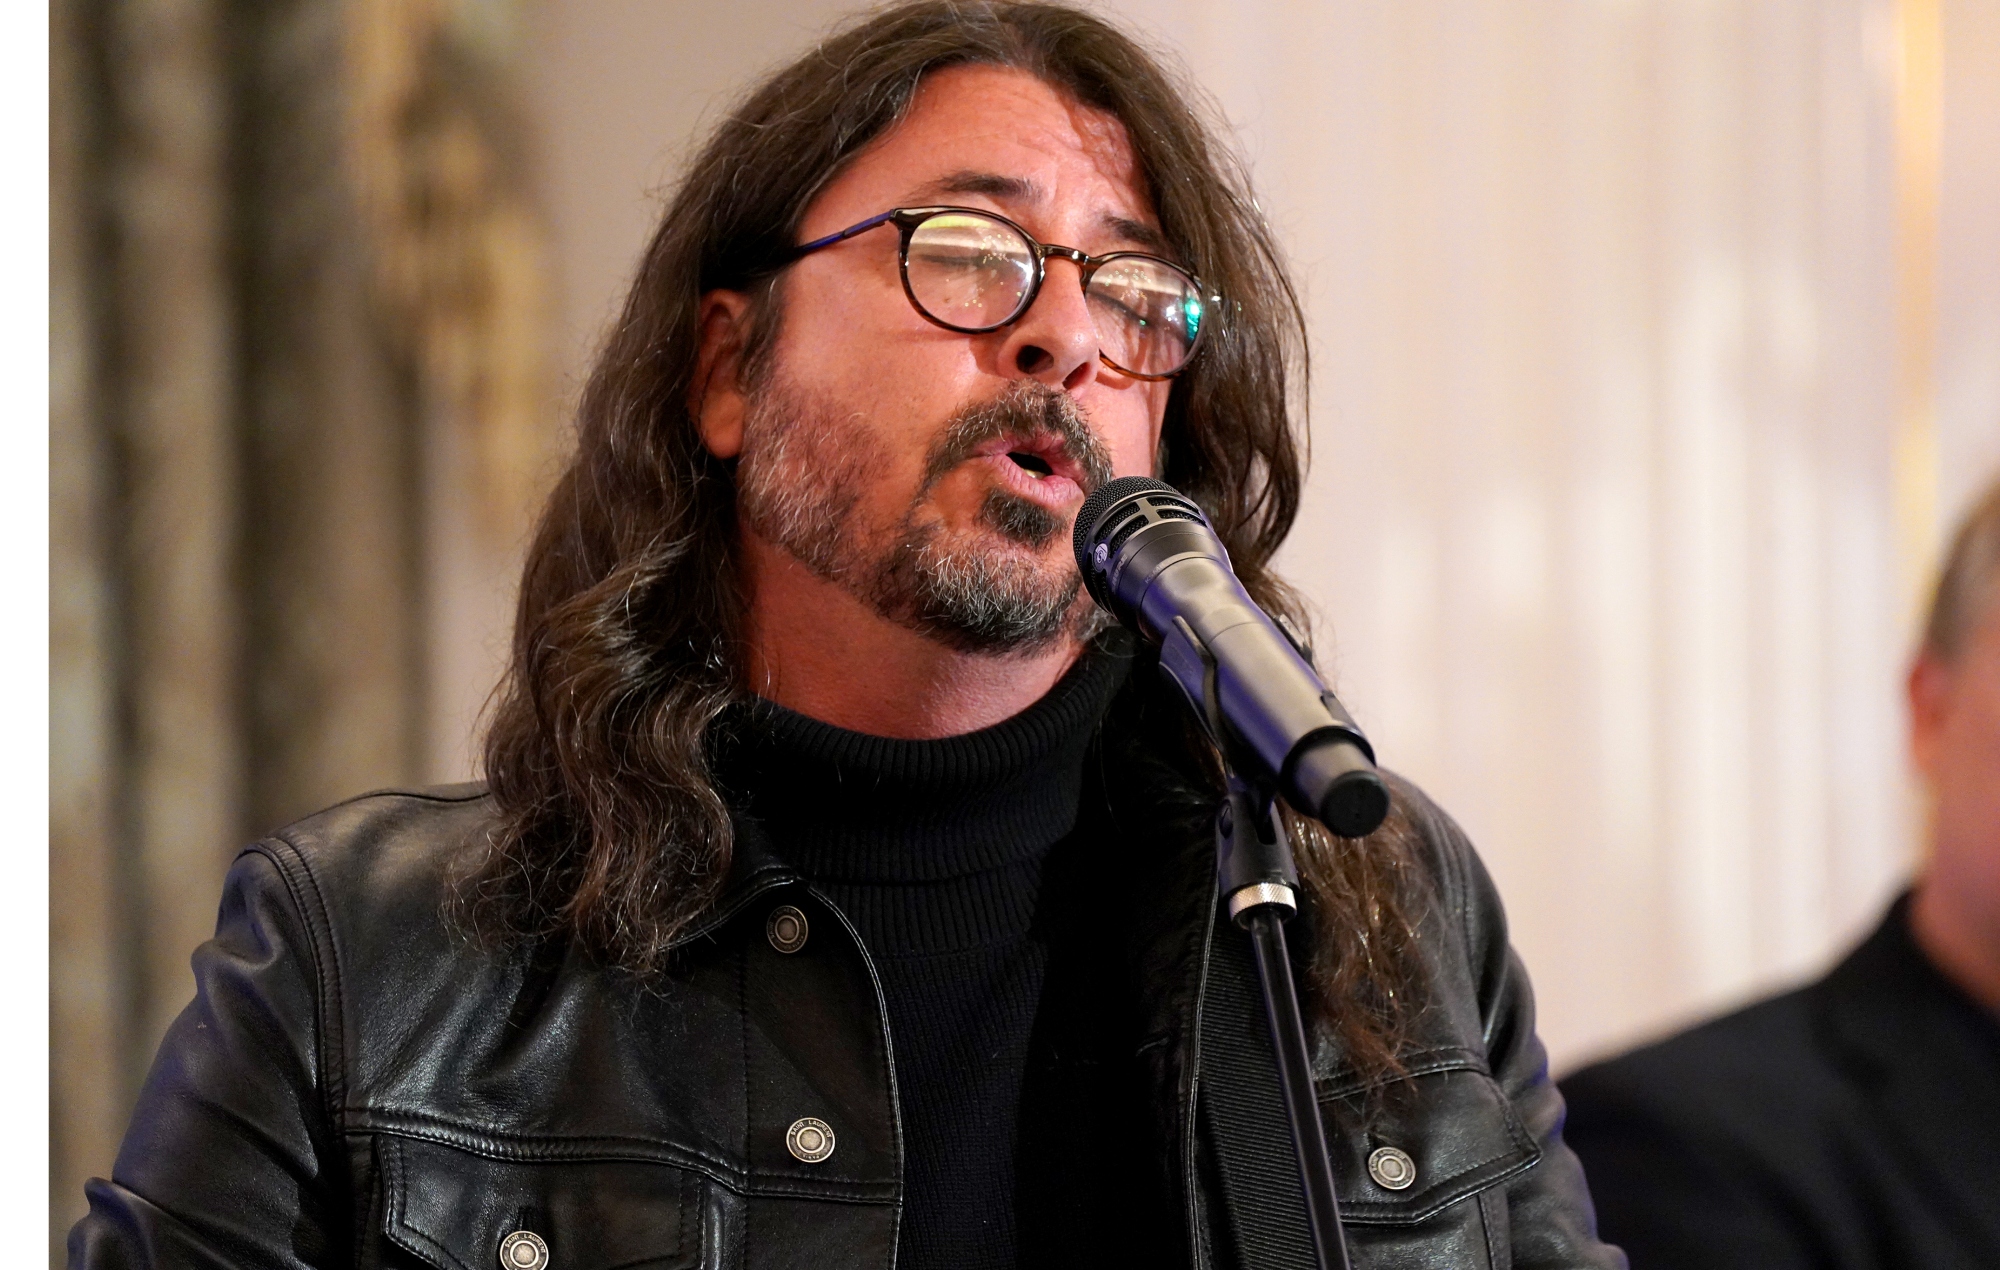 Dave Grohl shares feelings about whether Nirvana sold out: “I didn’t feel personally conflicted”